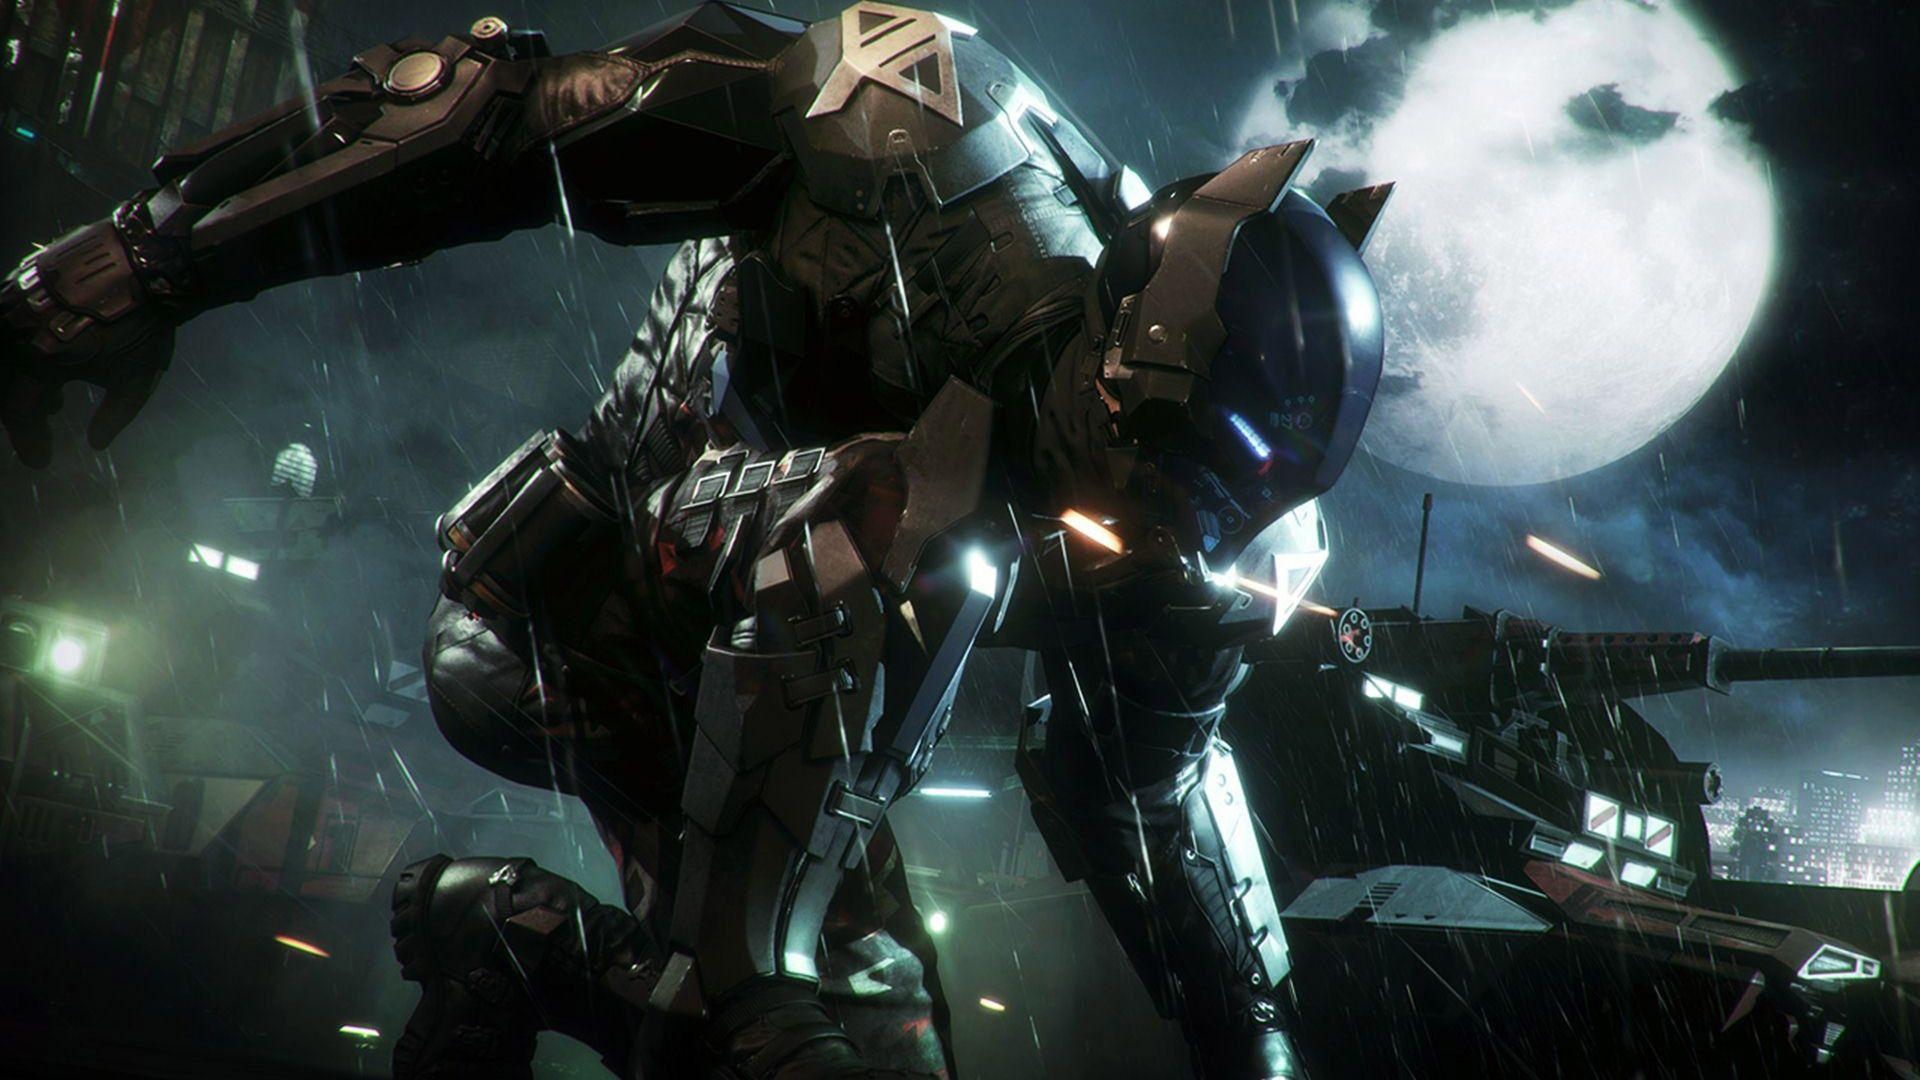 the arkham knight download free